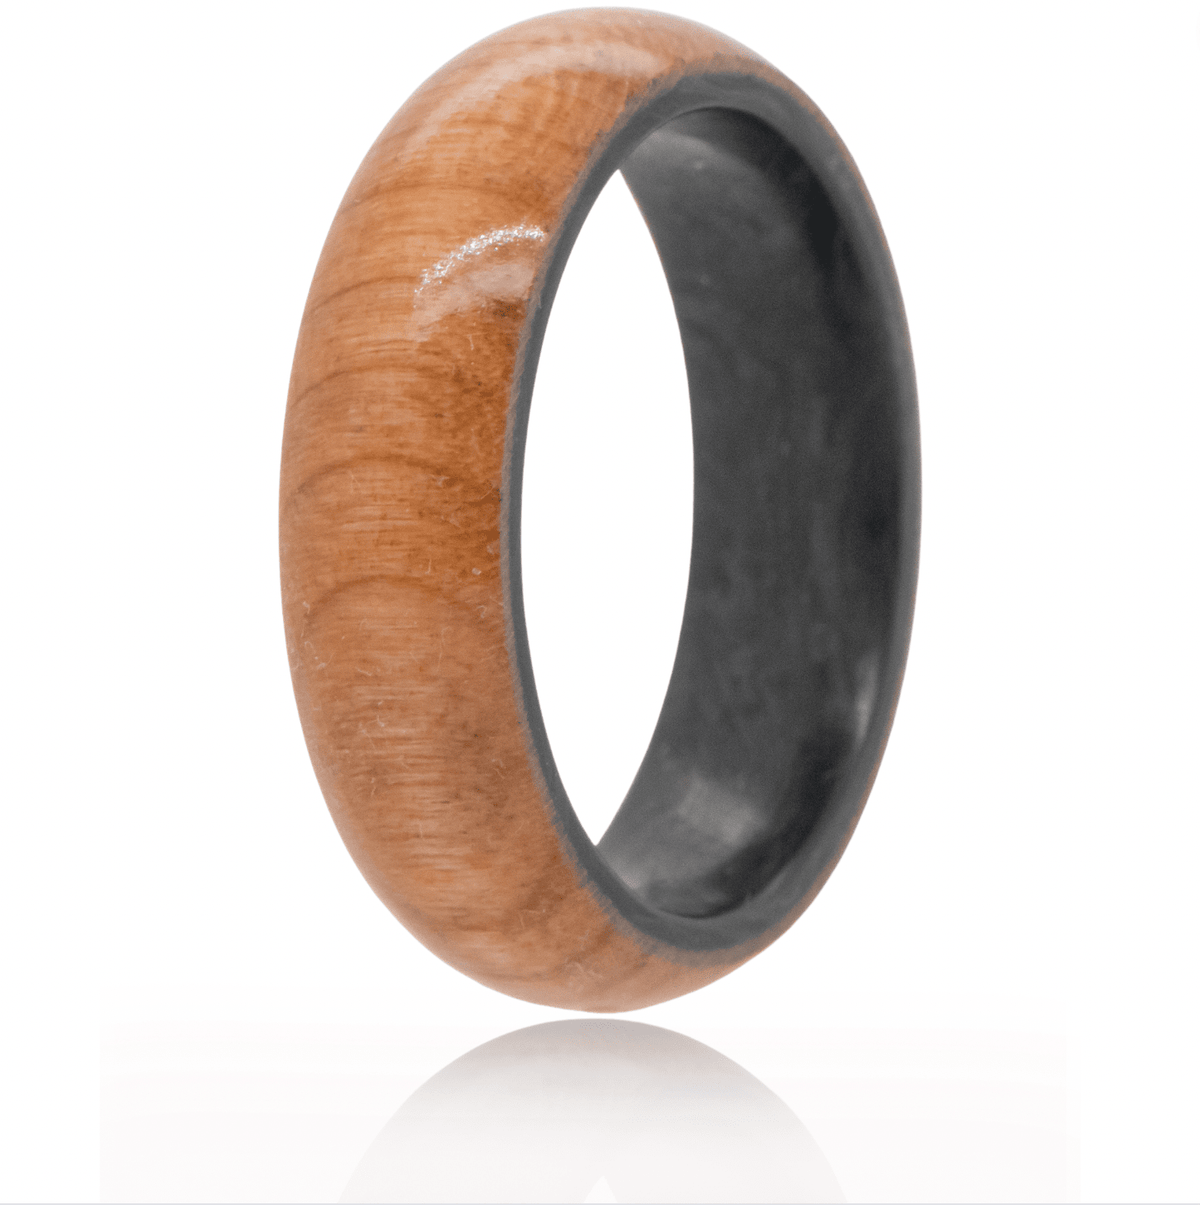 Cherry wood ring with forged carbon fiber interior. 